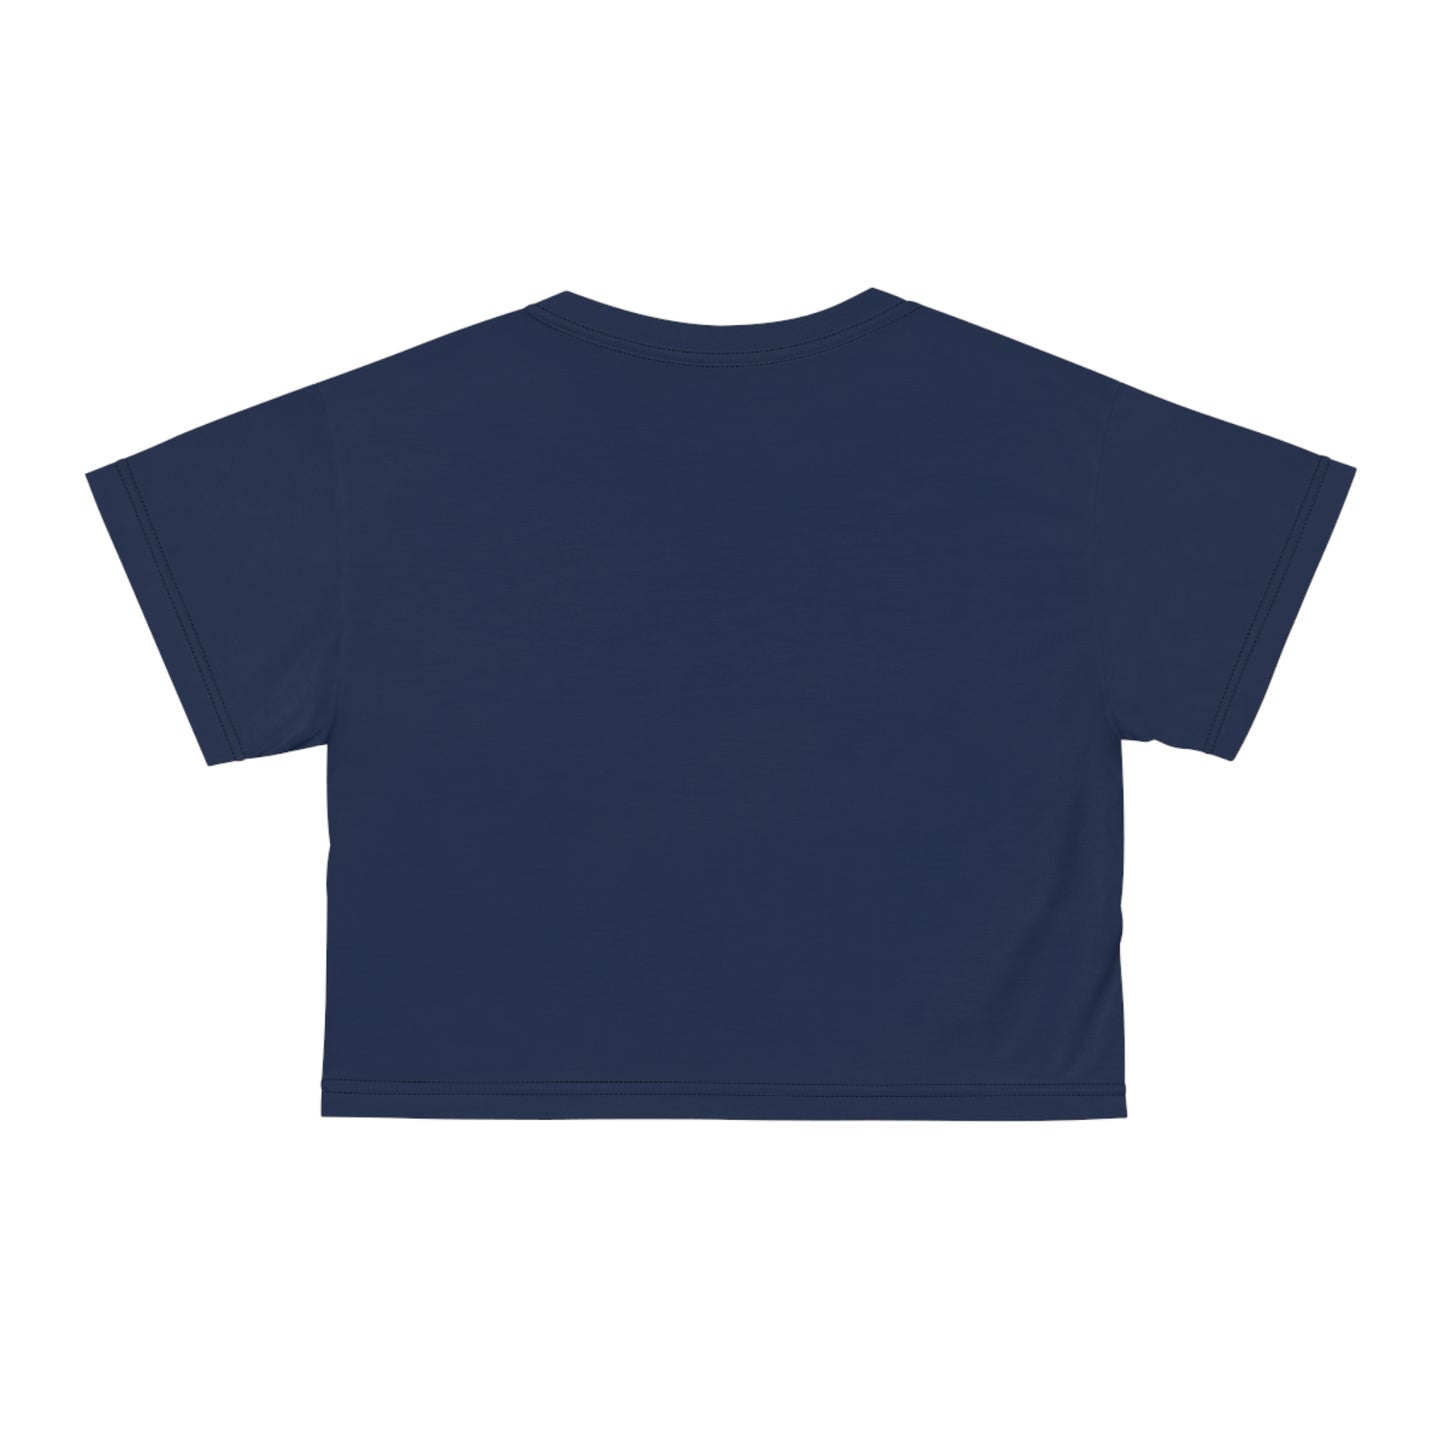 Lincoln Park Lions | Lincoln Park High School Crop Top